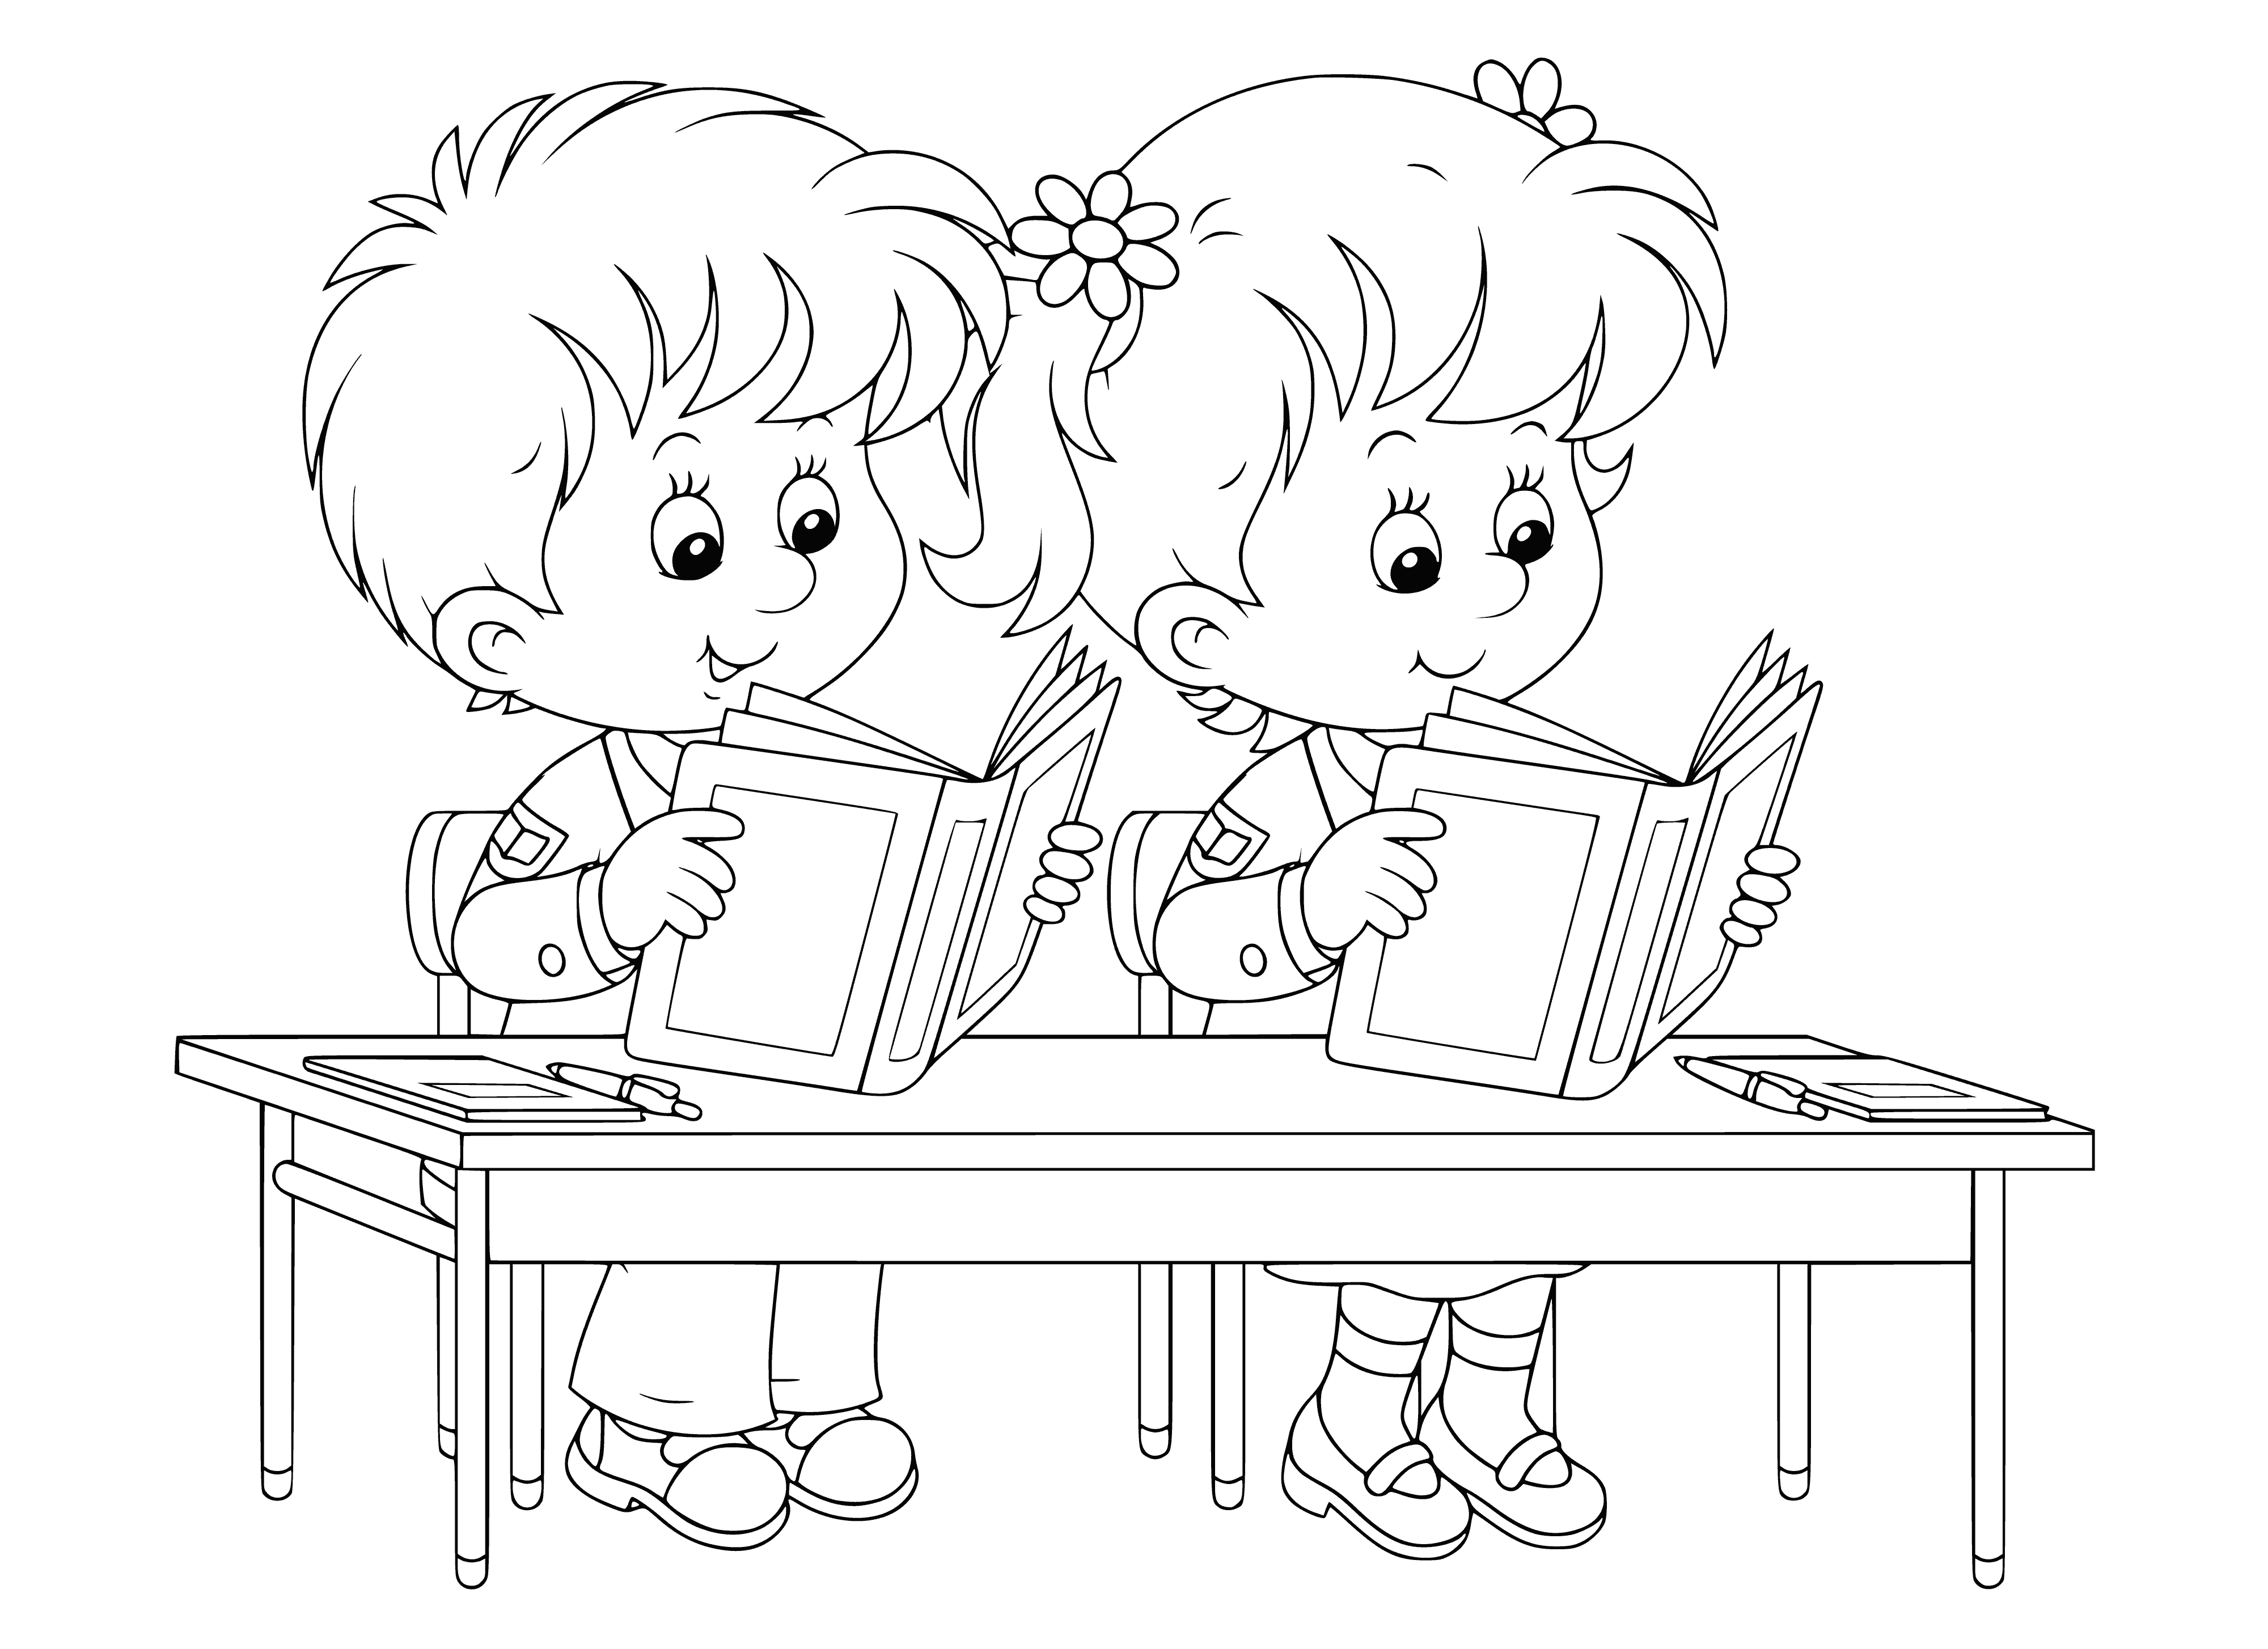 Pupils at the desk coloring page